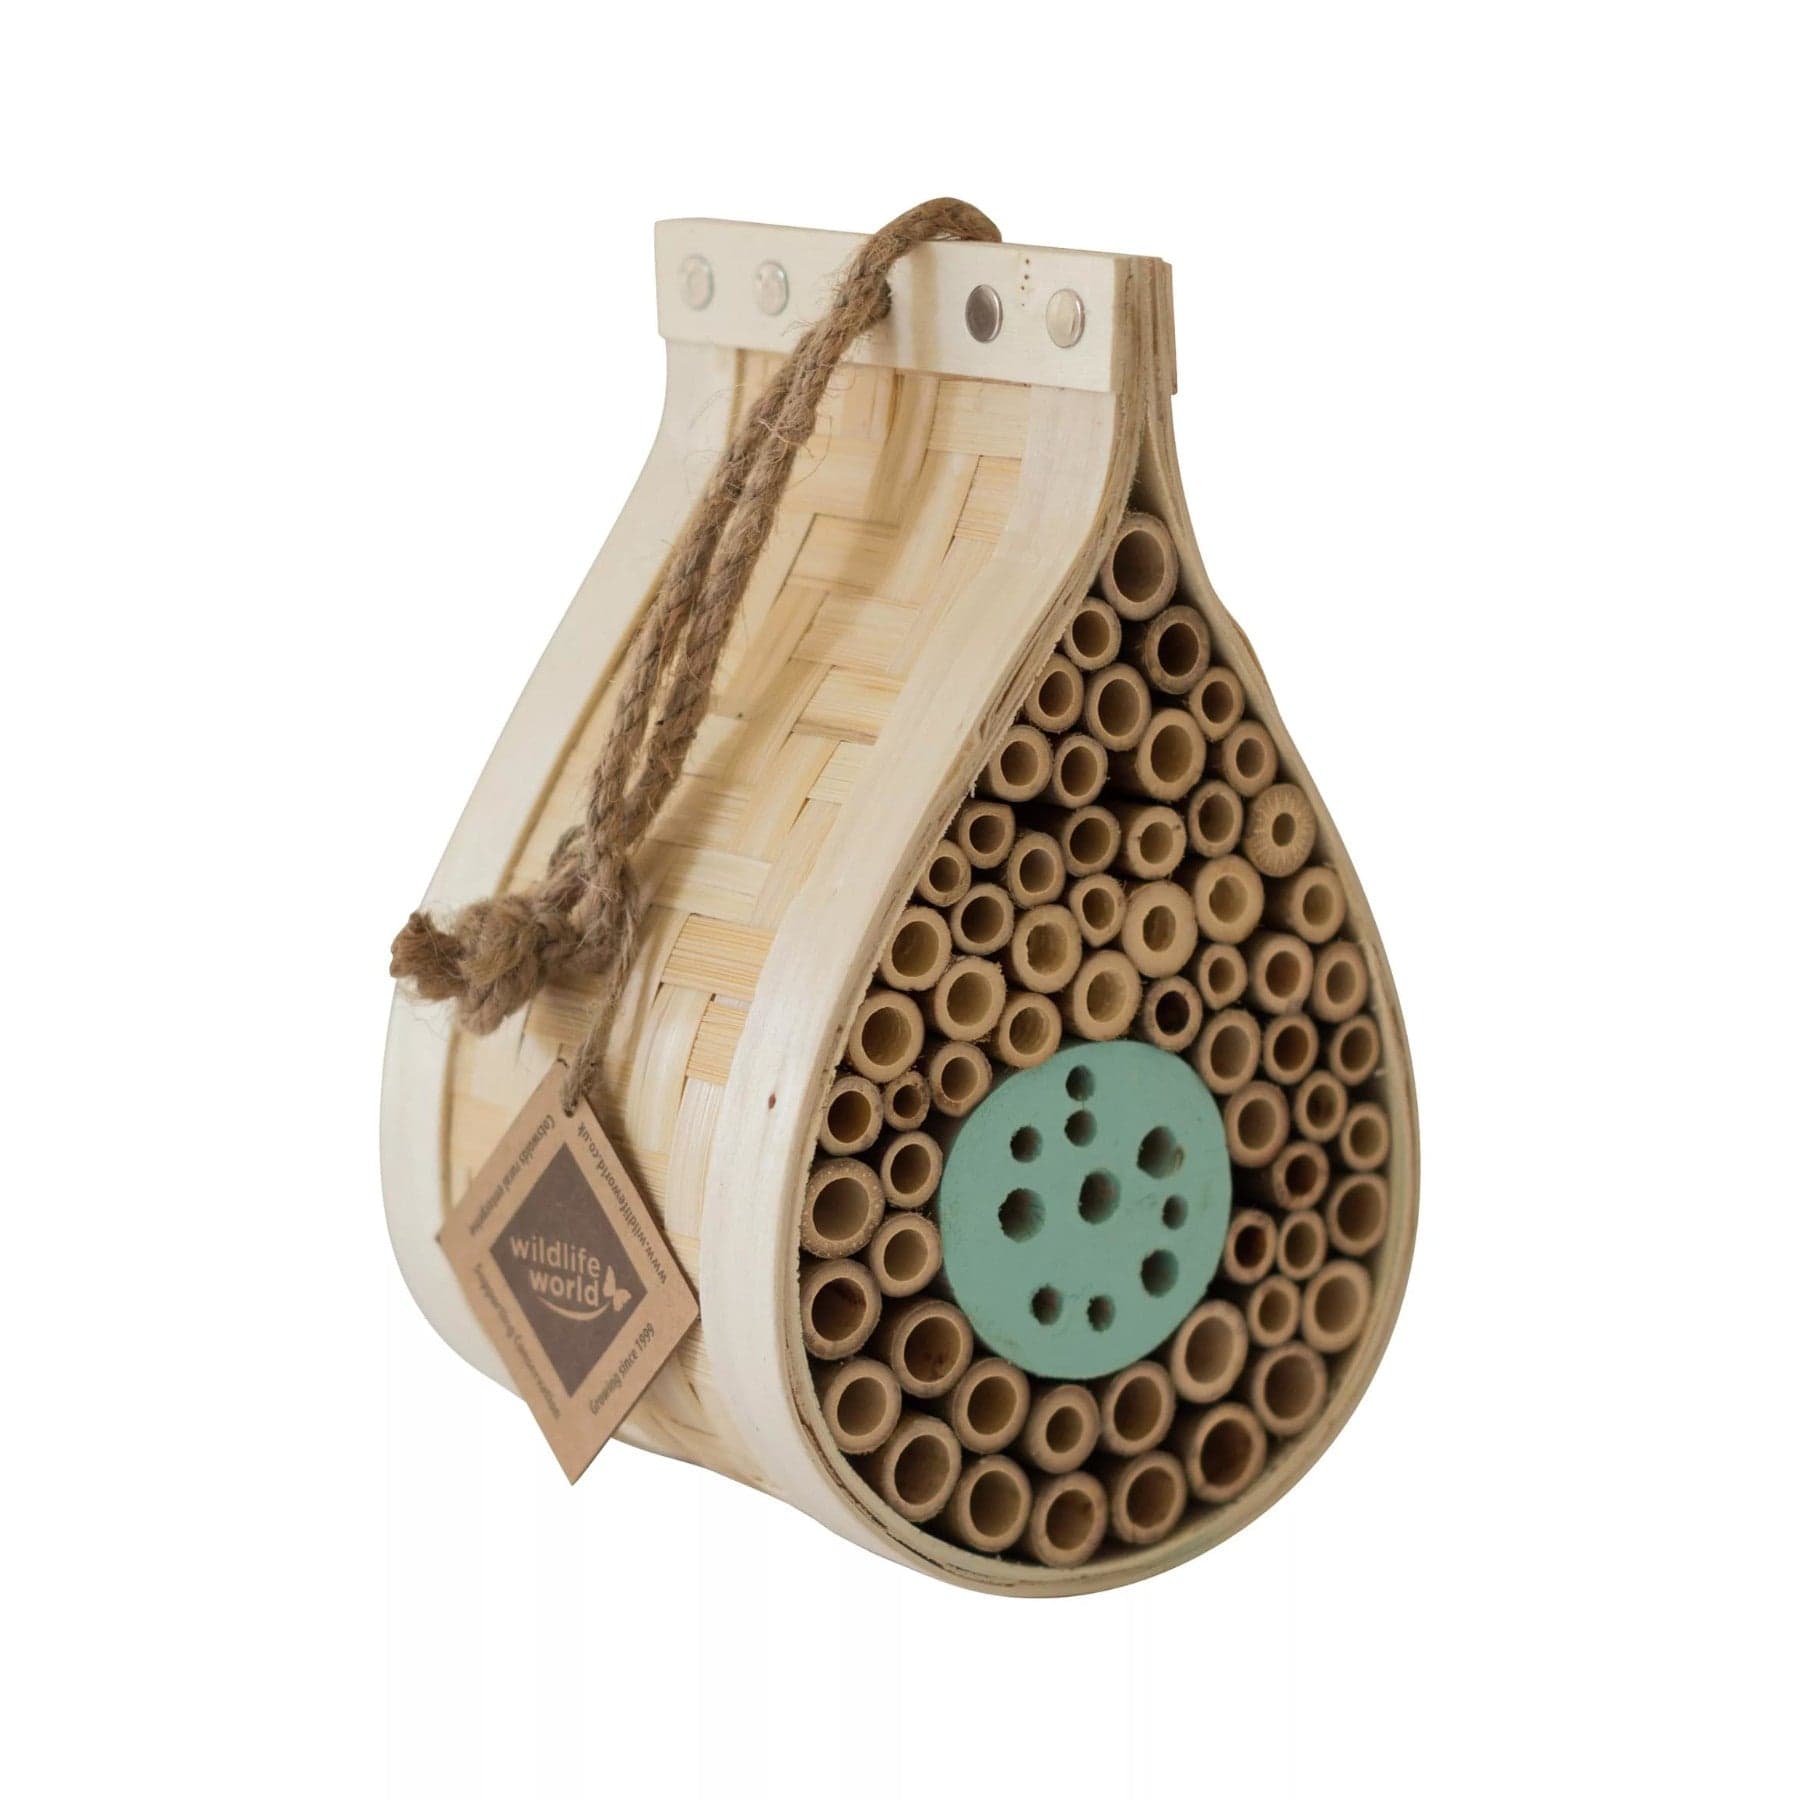 Wooden insect house, bee hotel with bamboo tubes, natural rope hanger, nesting habitat for garden pollinators, eco-friendly wildlife conservation shelter, isolated on white background.